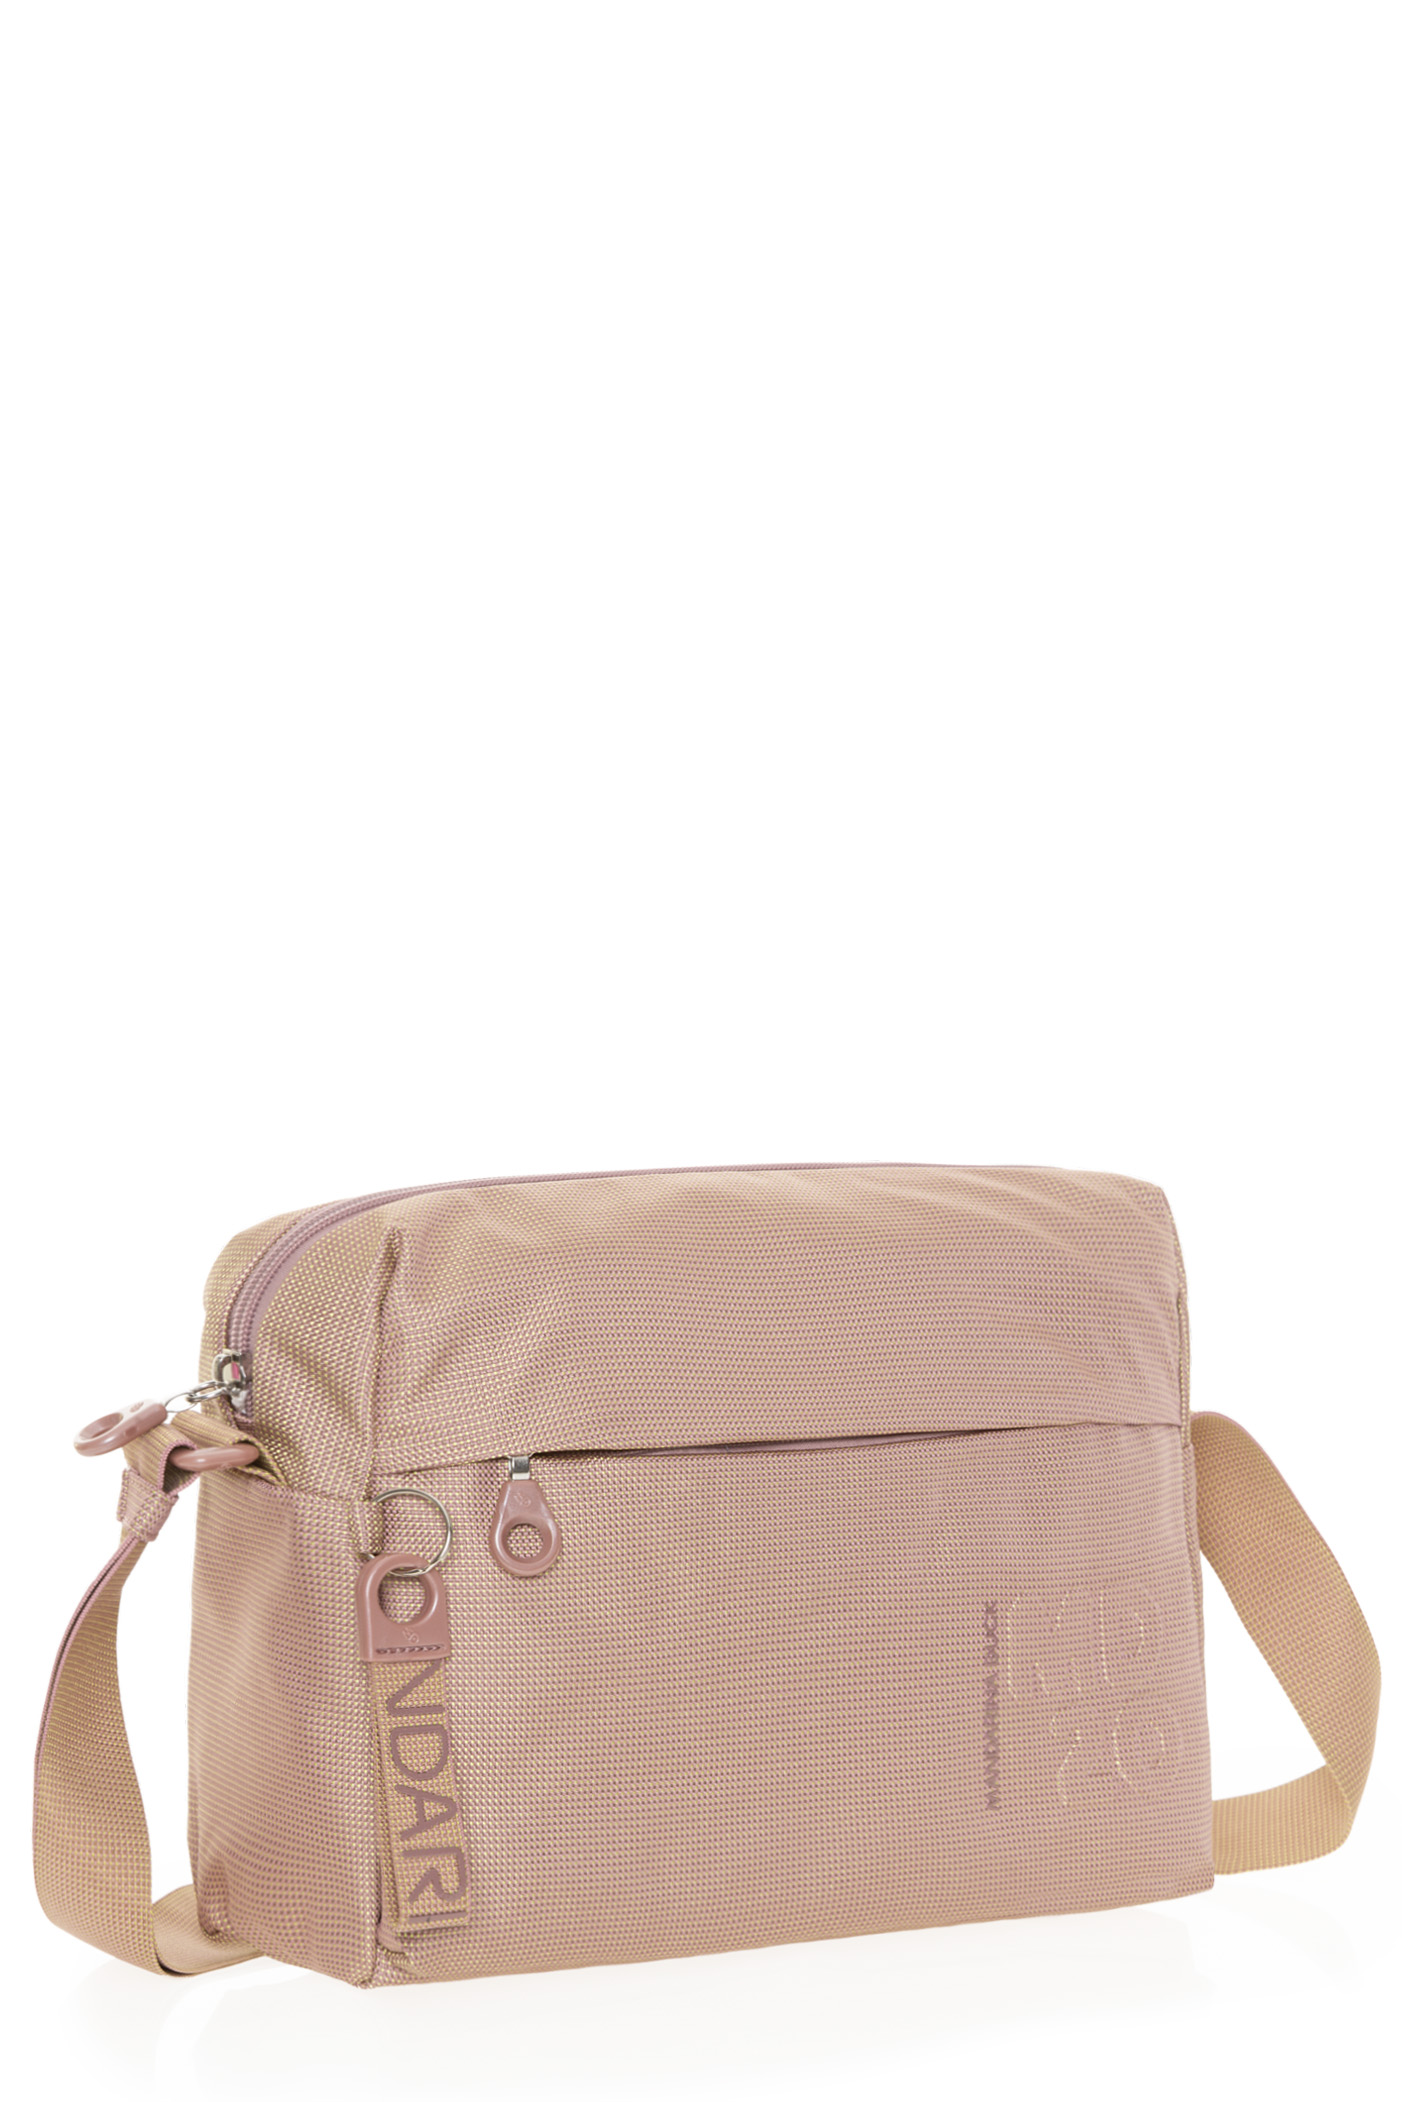 (image for) Borsa a tracolla F0816222-0366 mandarina duck outlet online